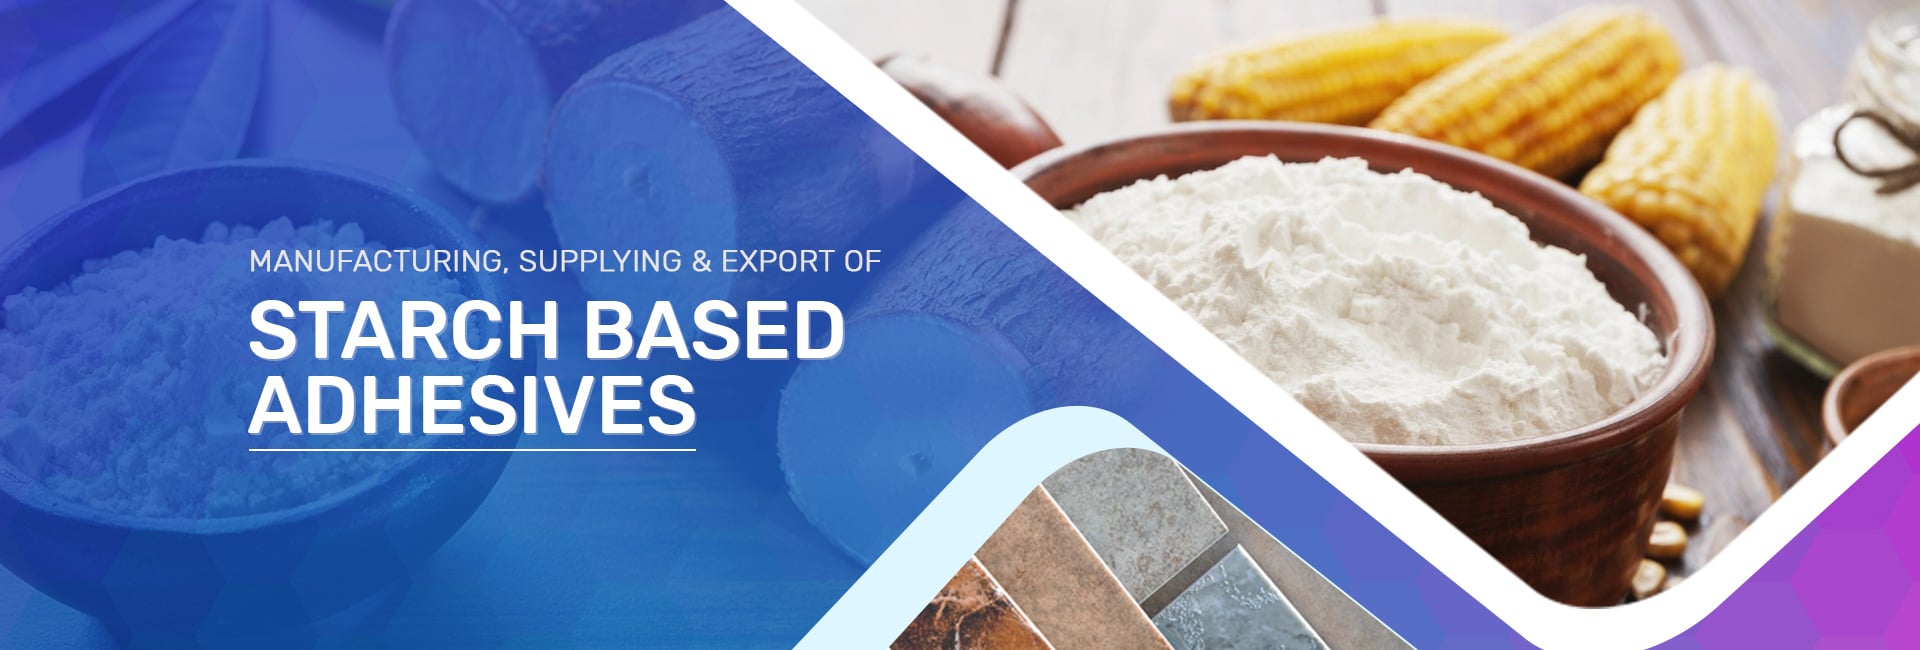 Starch Based Adhesives - We are leading Oxidized Starch Exporter in India